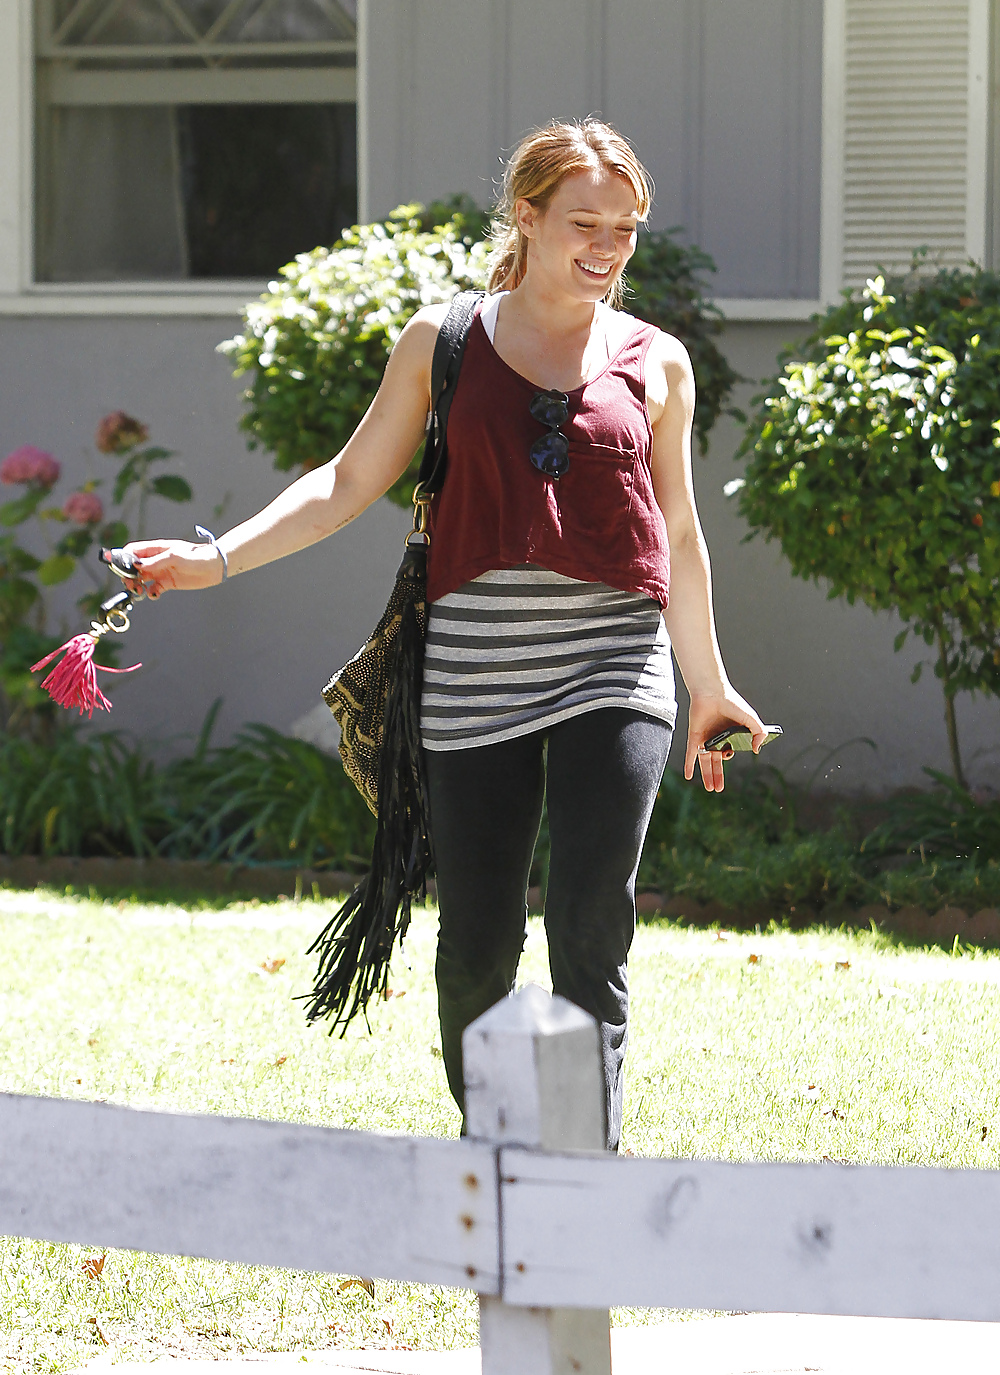 Hilary Duff Goes To Yoga Class Looking Happy Hollywood #7464101